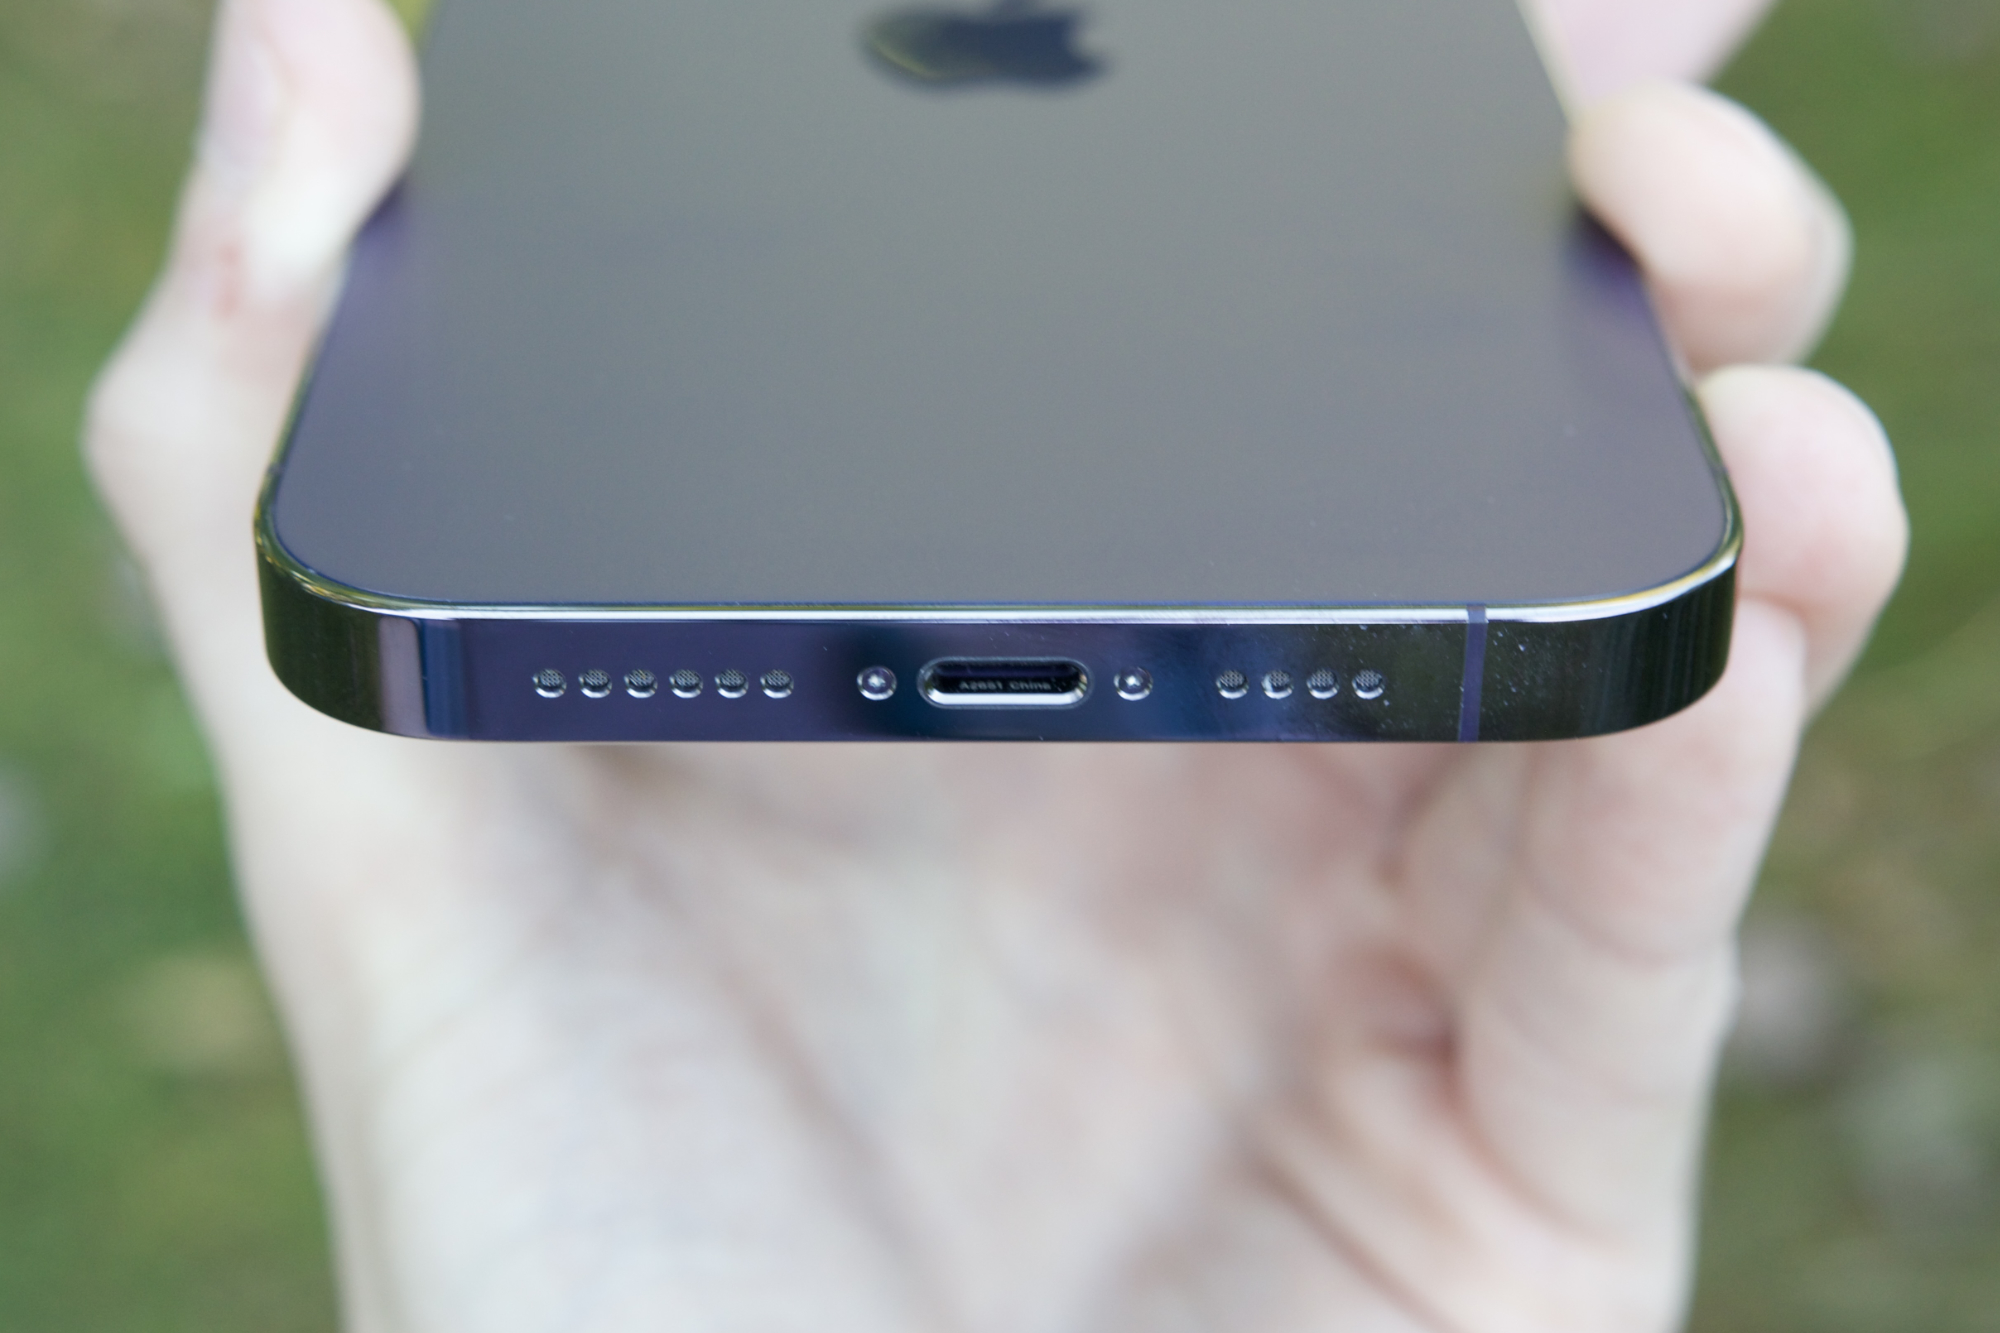 iPhone will feature USB-C charging port, says Apple executive